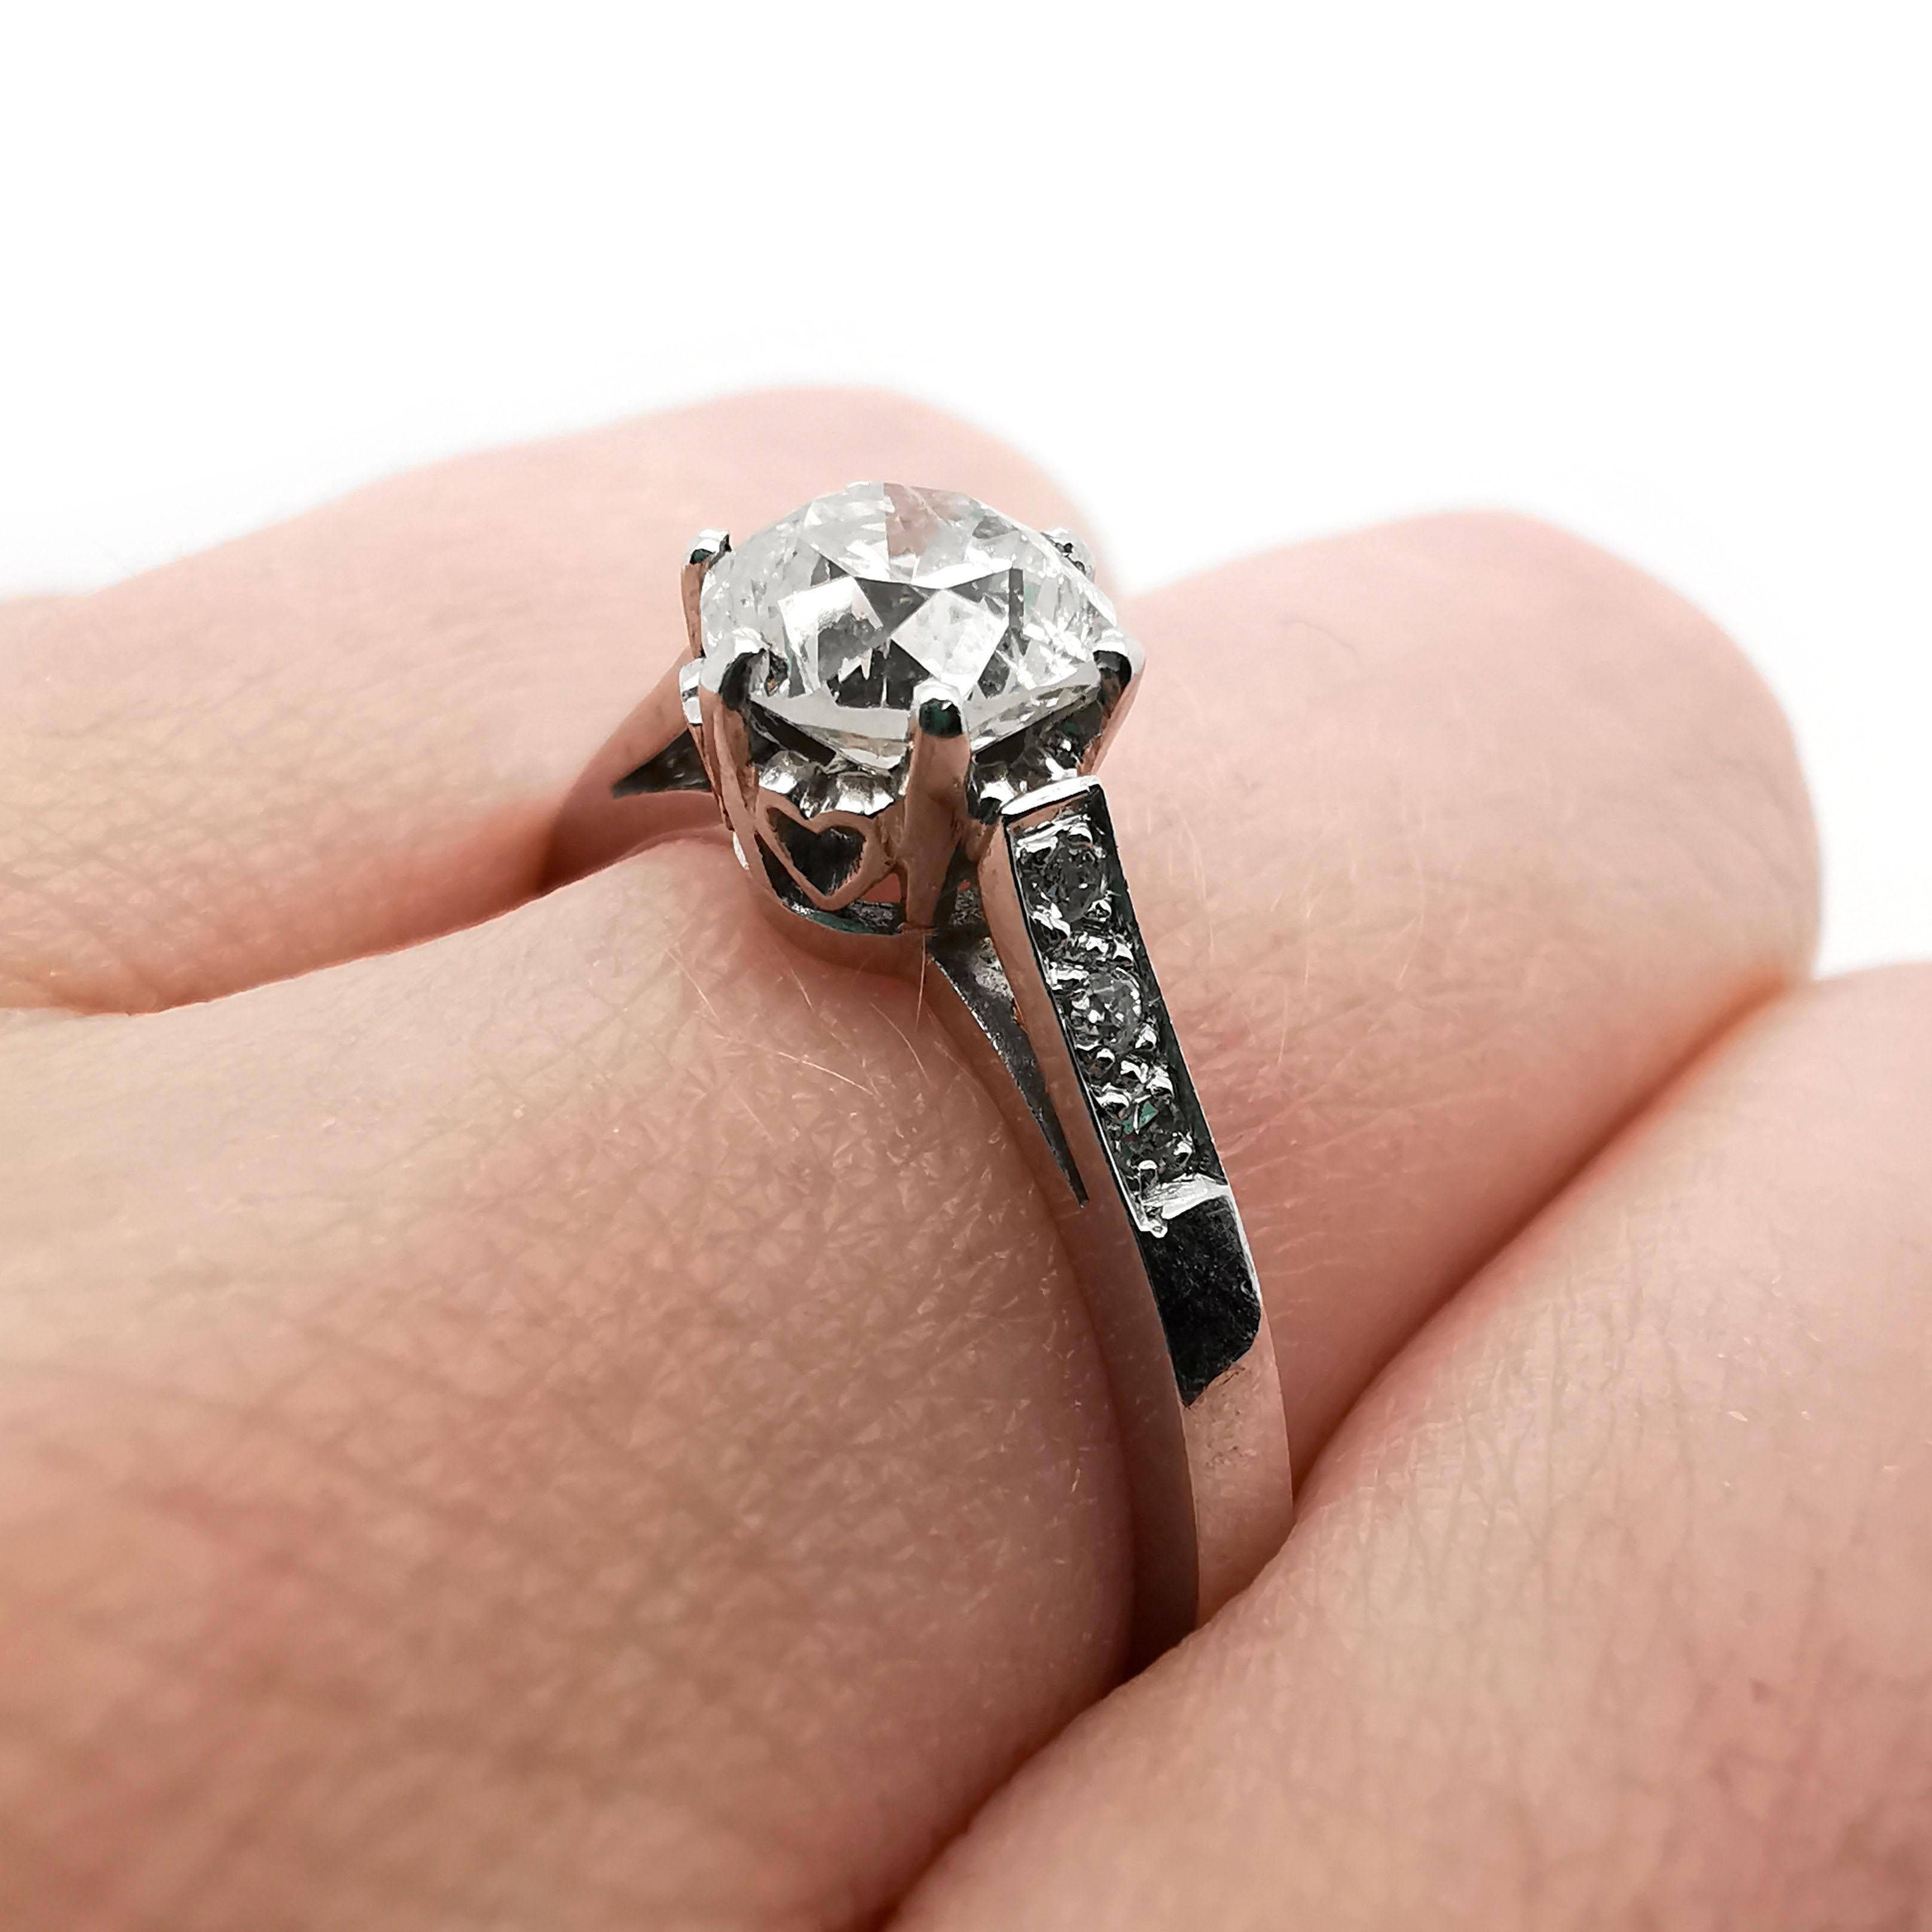 A single stone diamond ring, set with a 1.00 carat, L colour, I1 clarity round brilliant-cut diamond, in a six claw setting, with hearts decorating the collet between the claws, with three small diamonds set in each shoulder, in grain settings,